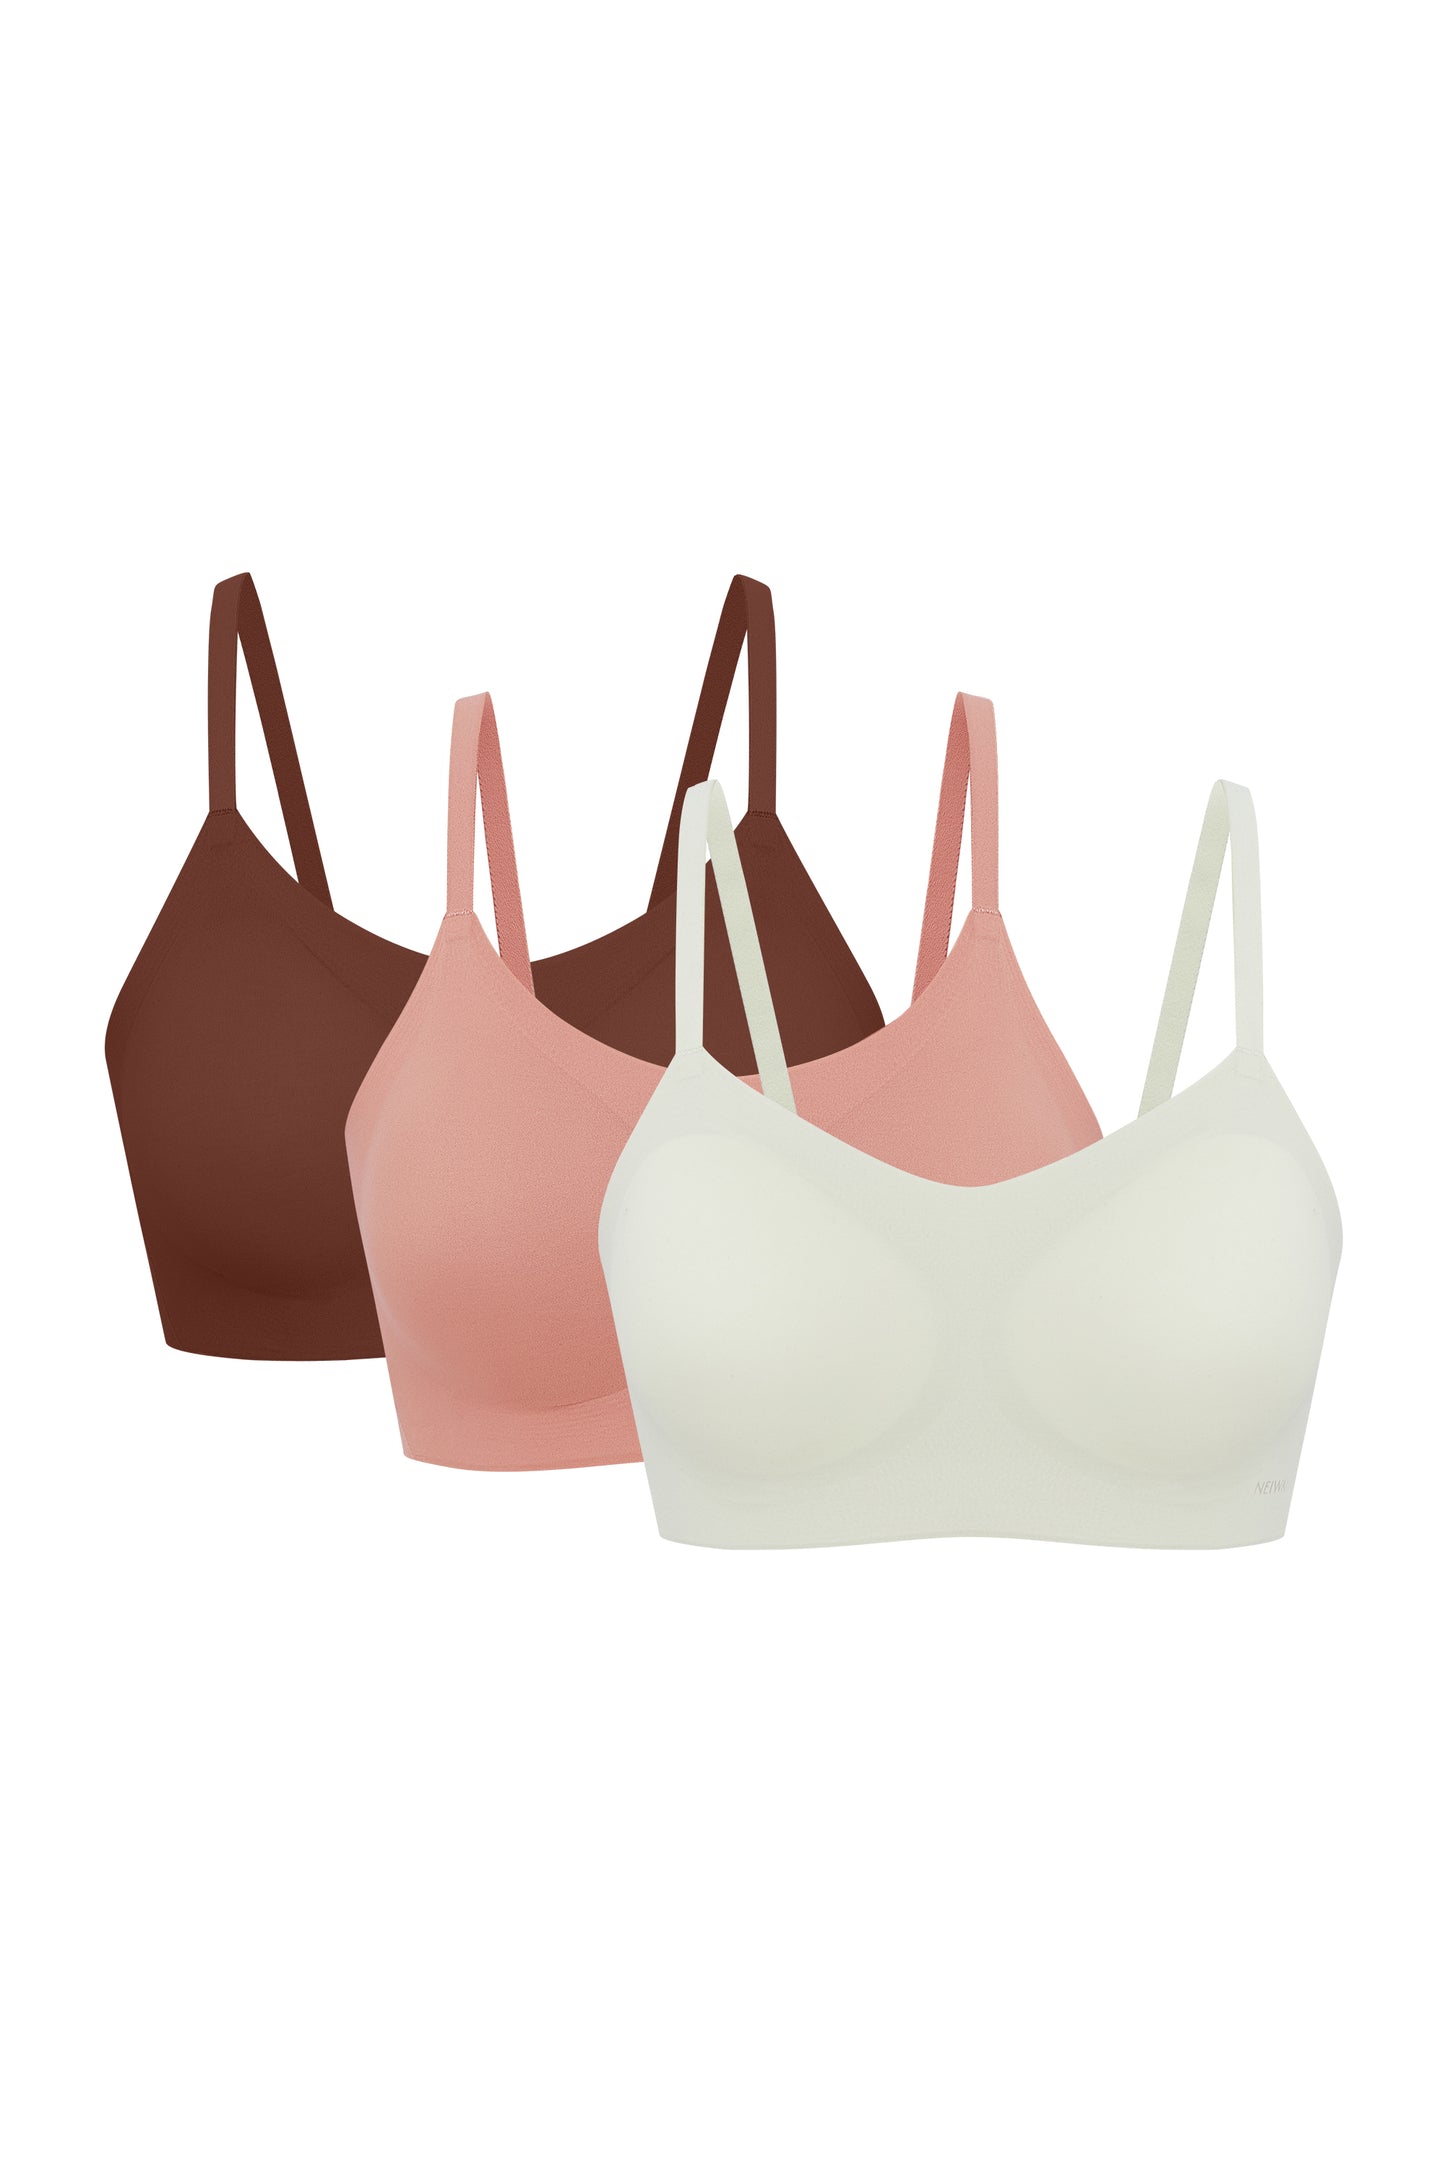 Flat lay image of off-white, coral, and brown spaghetti strap bras